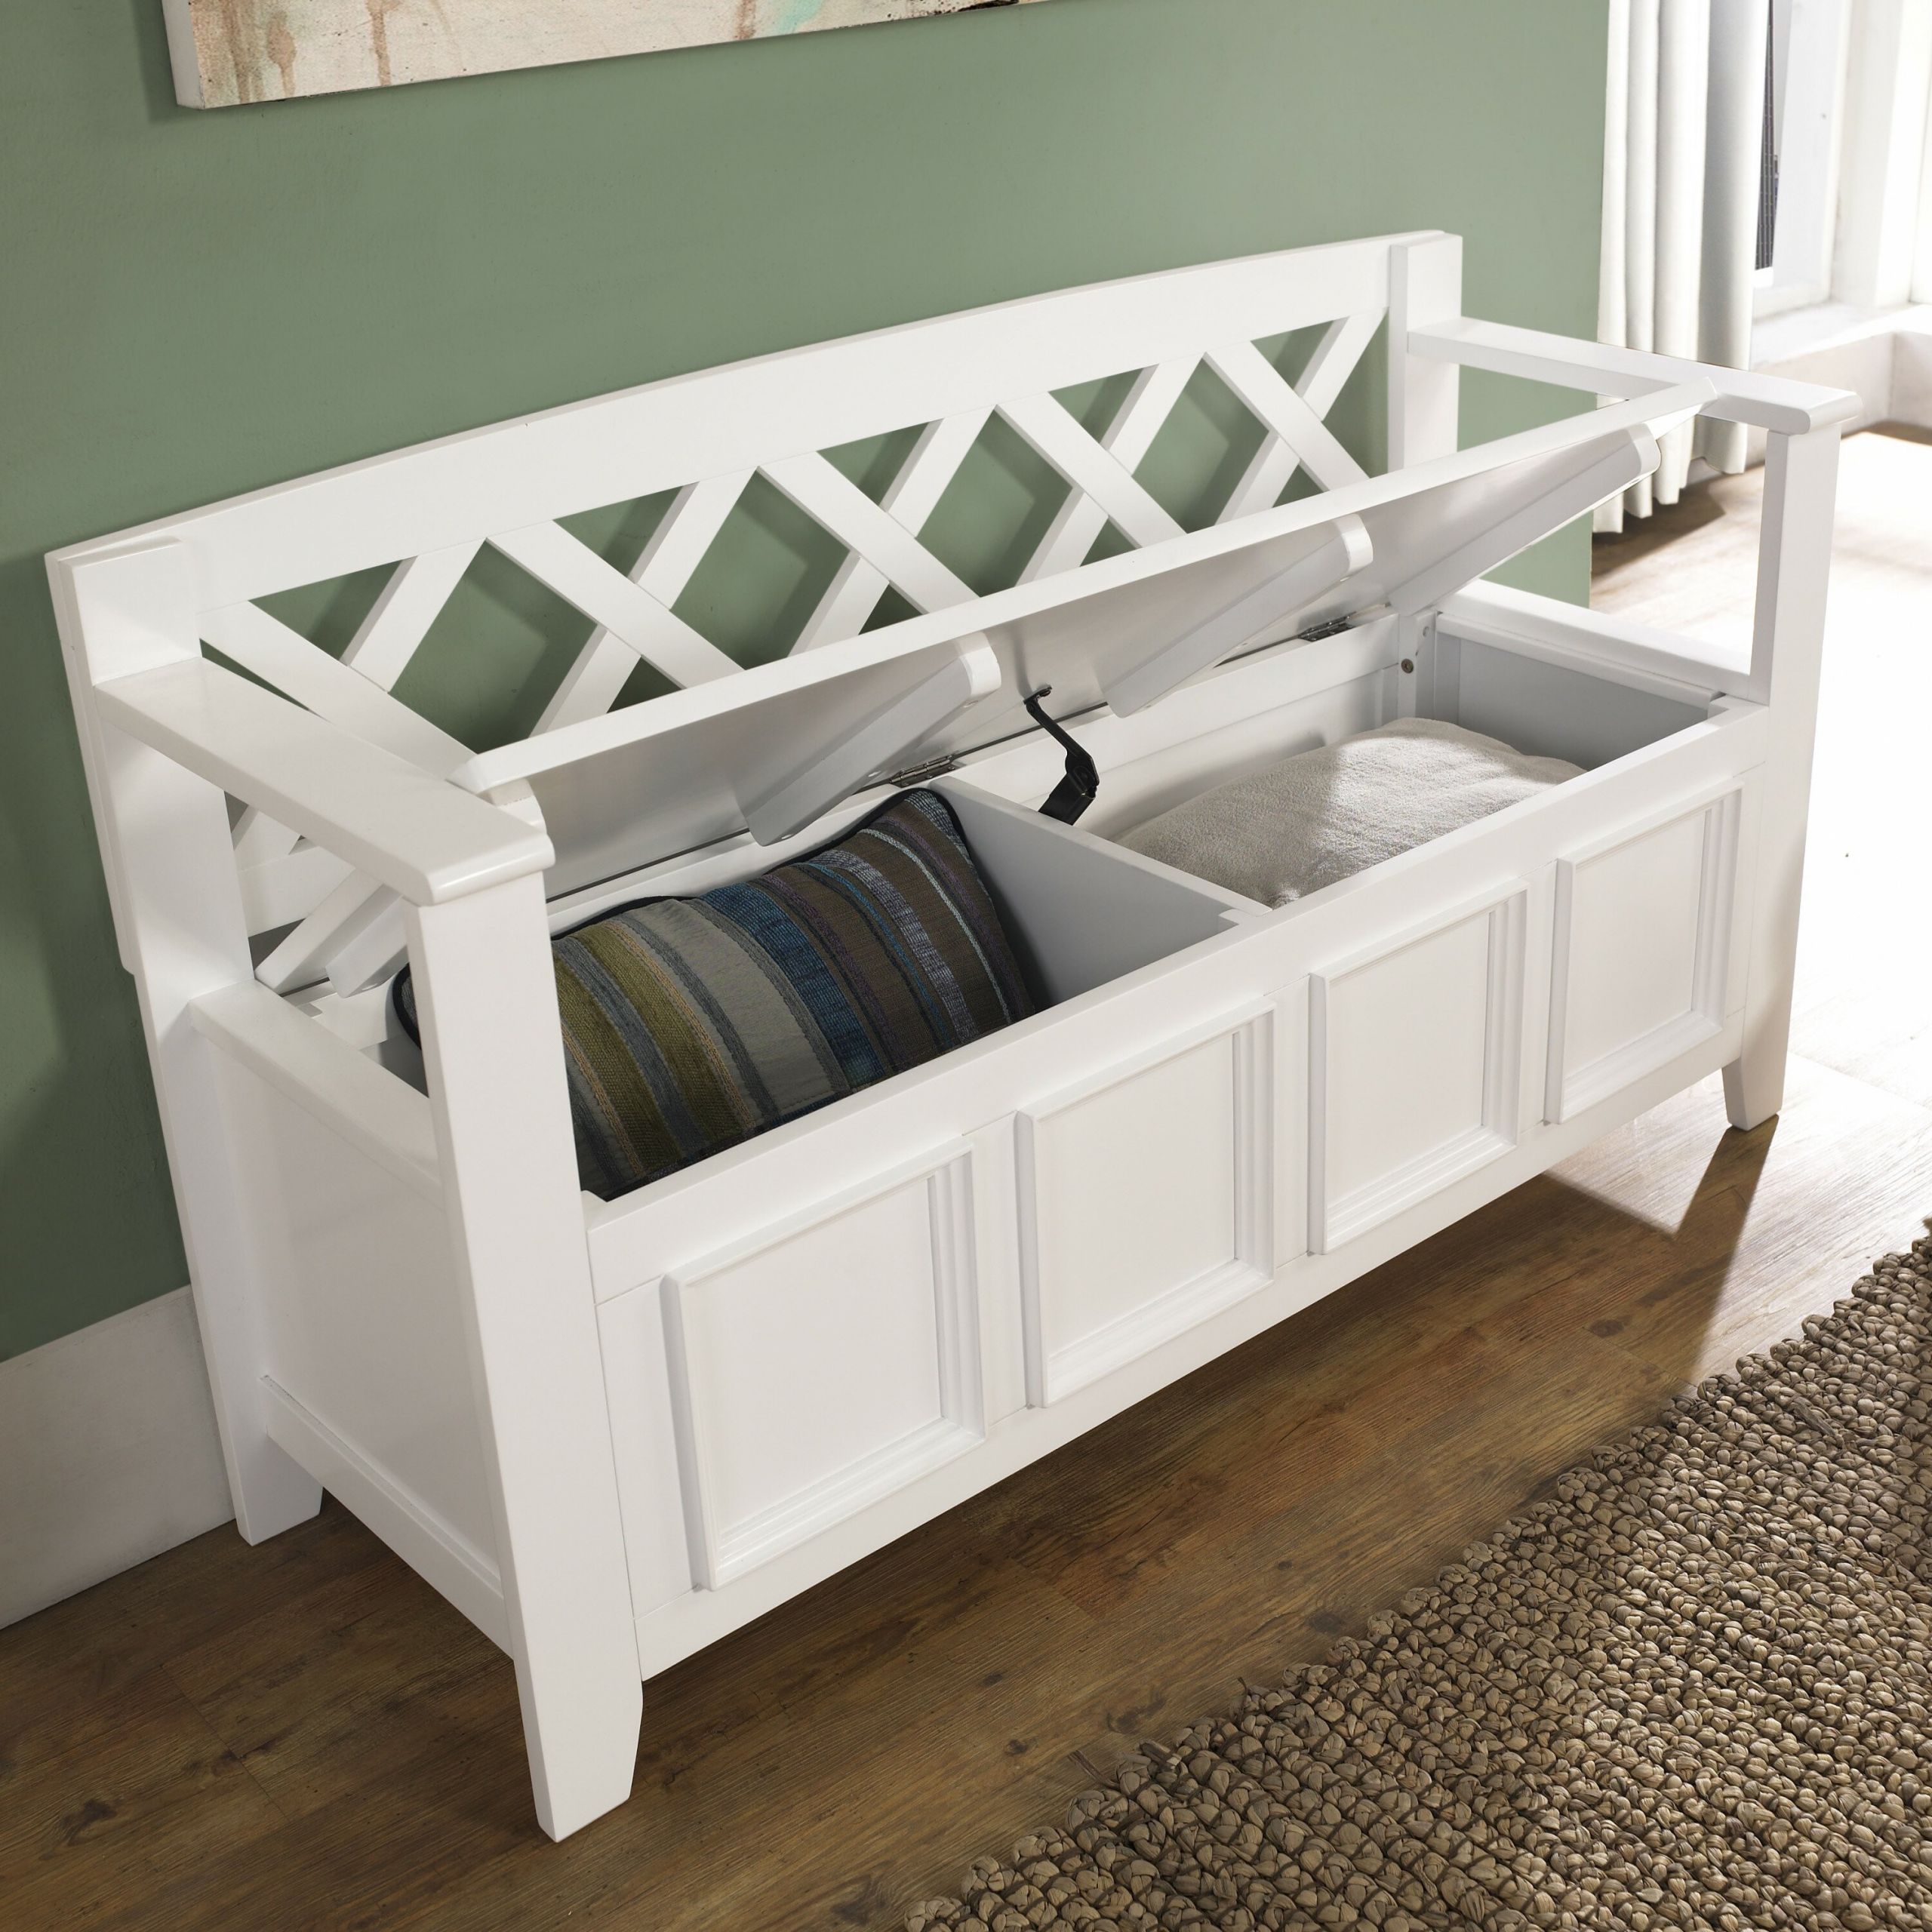 Bench For Entryway With Storage
 Simpli Home Amherst Wood Storage Entryway Bench & Reviews